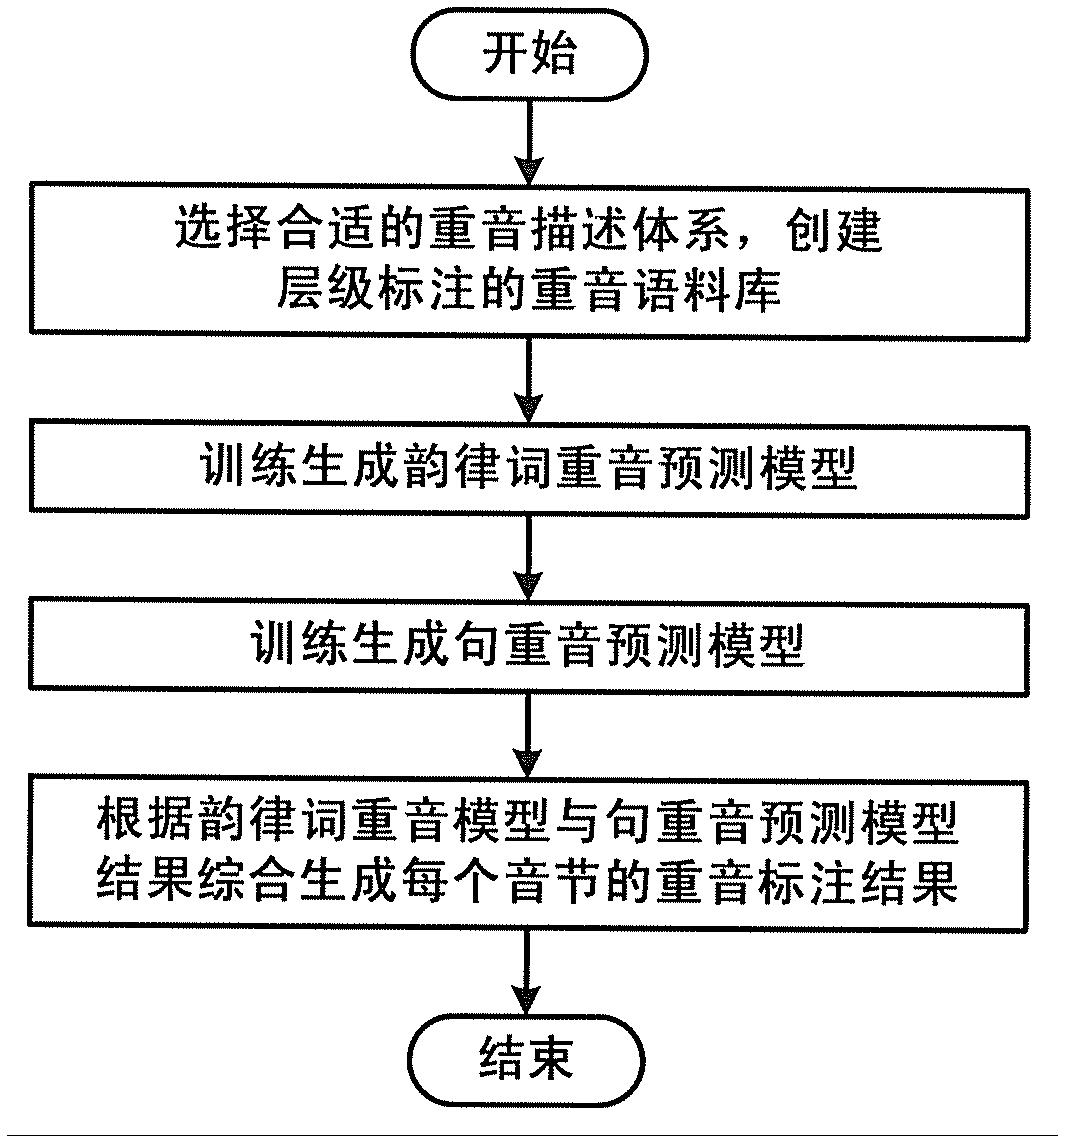 Method for carrying out hierarchical modeling and predicating on mandarin accent